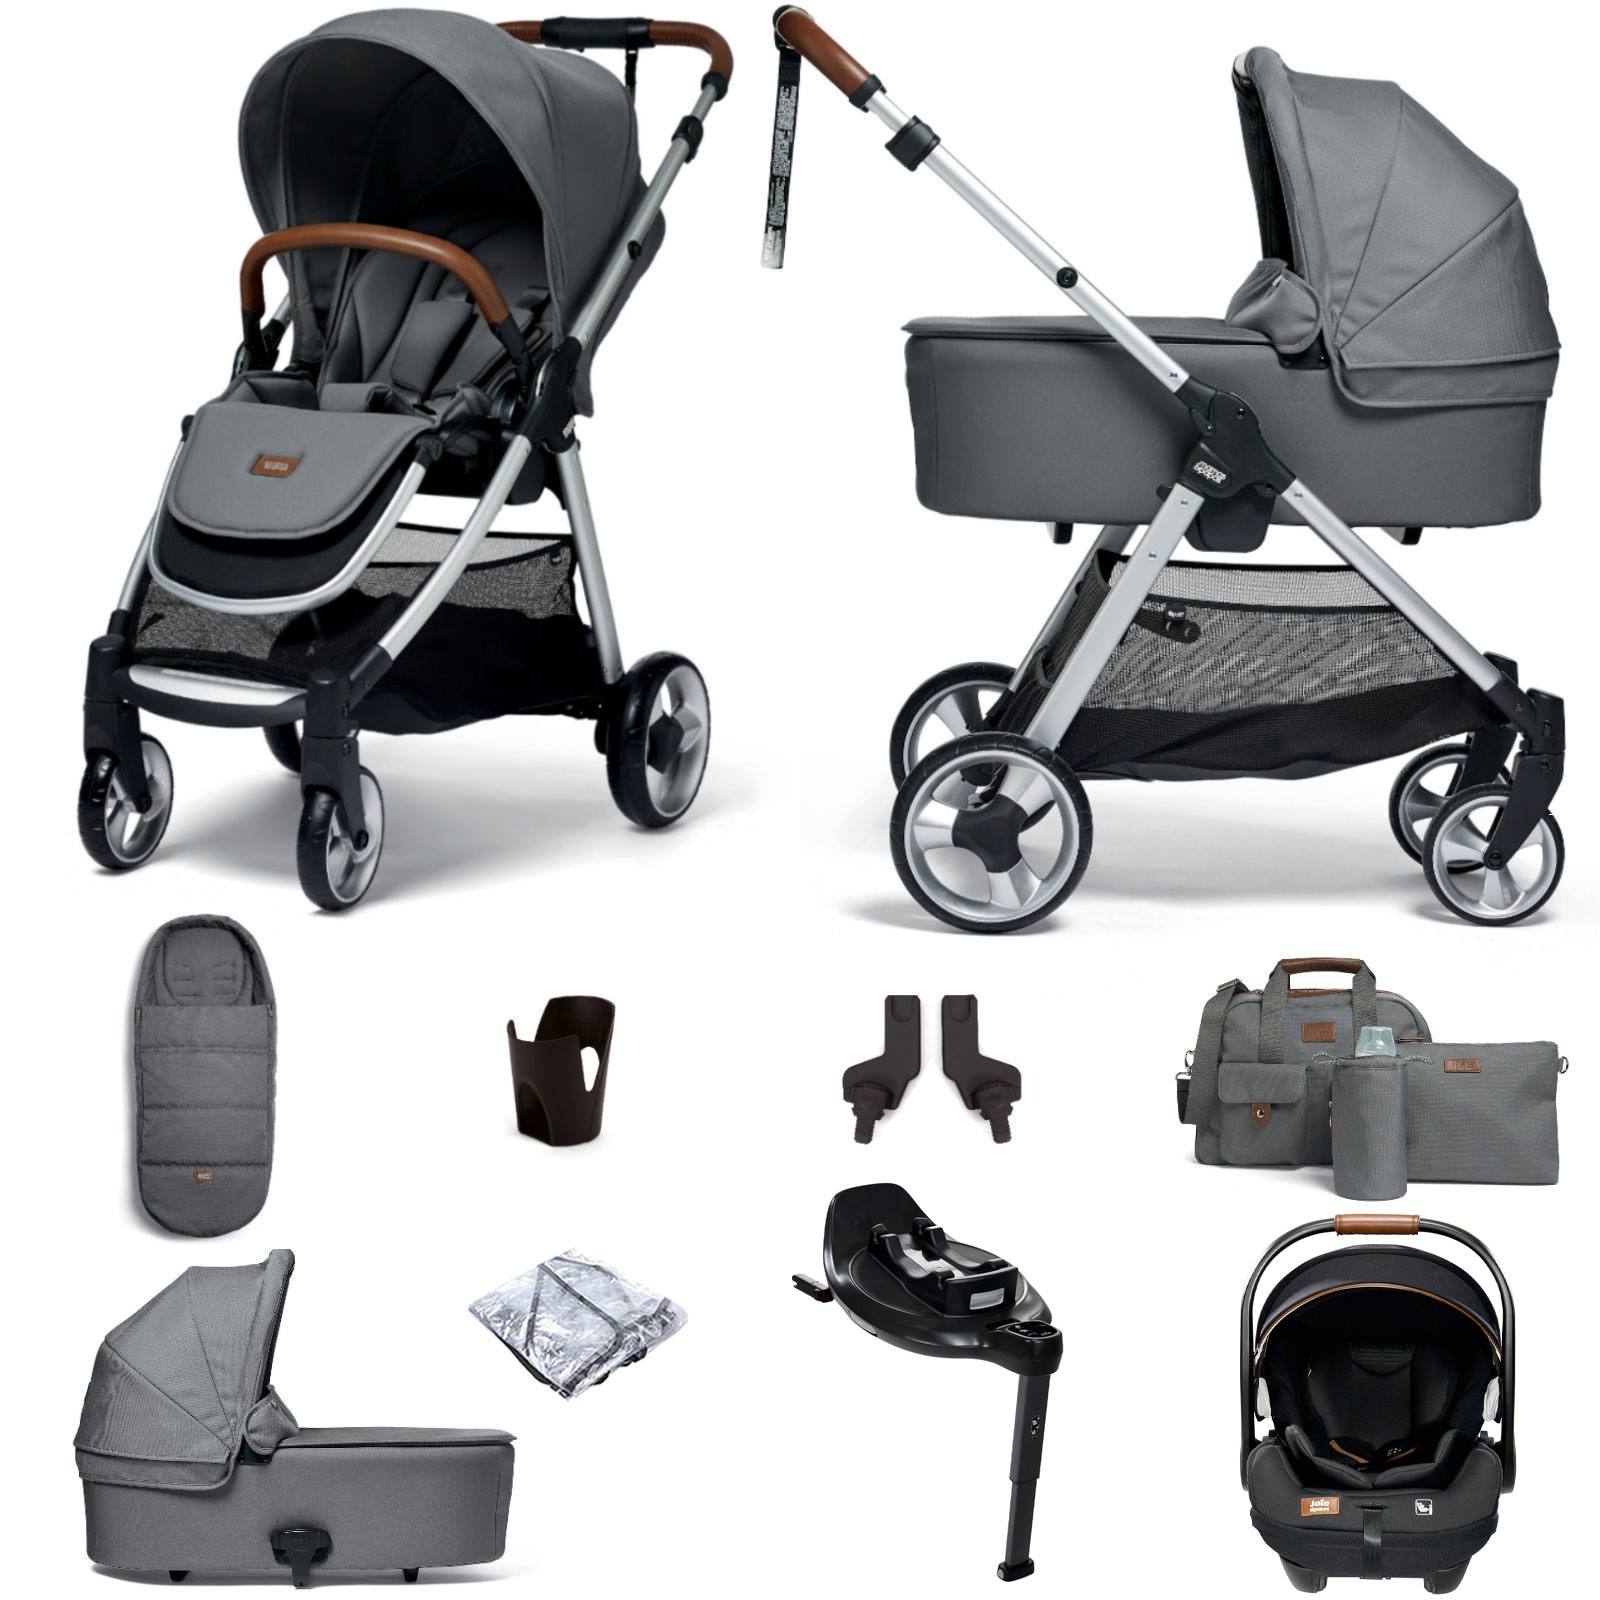 Mamas & Papas Flip XT2 Travel System with Carrycot, Accessories, i-Level Recline Car Seat & i-Base Encore - Fossil Grey